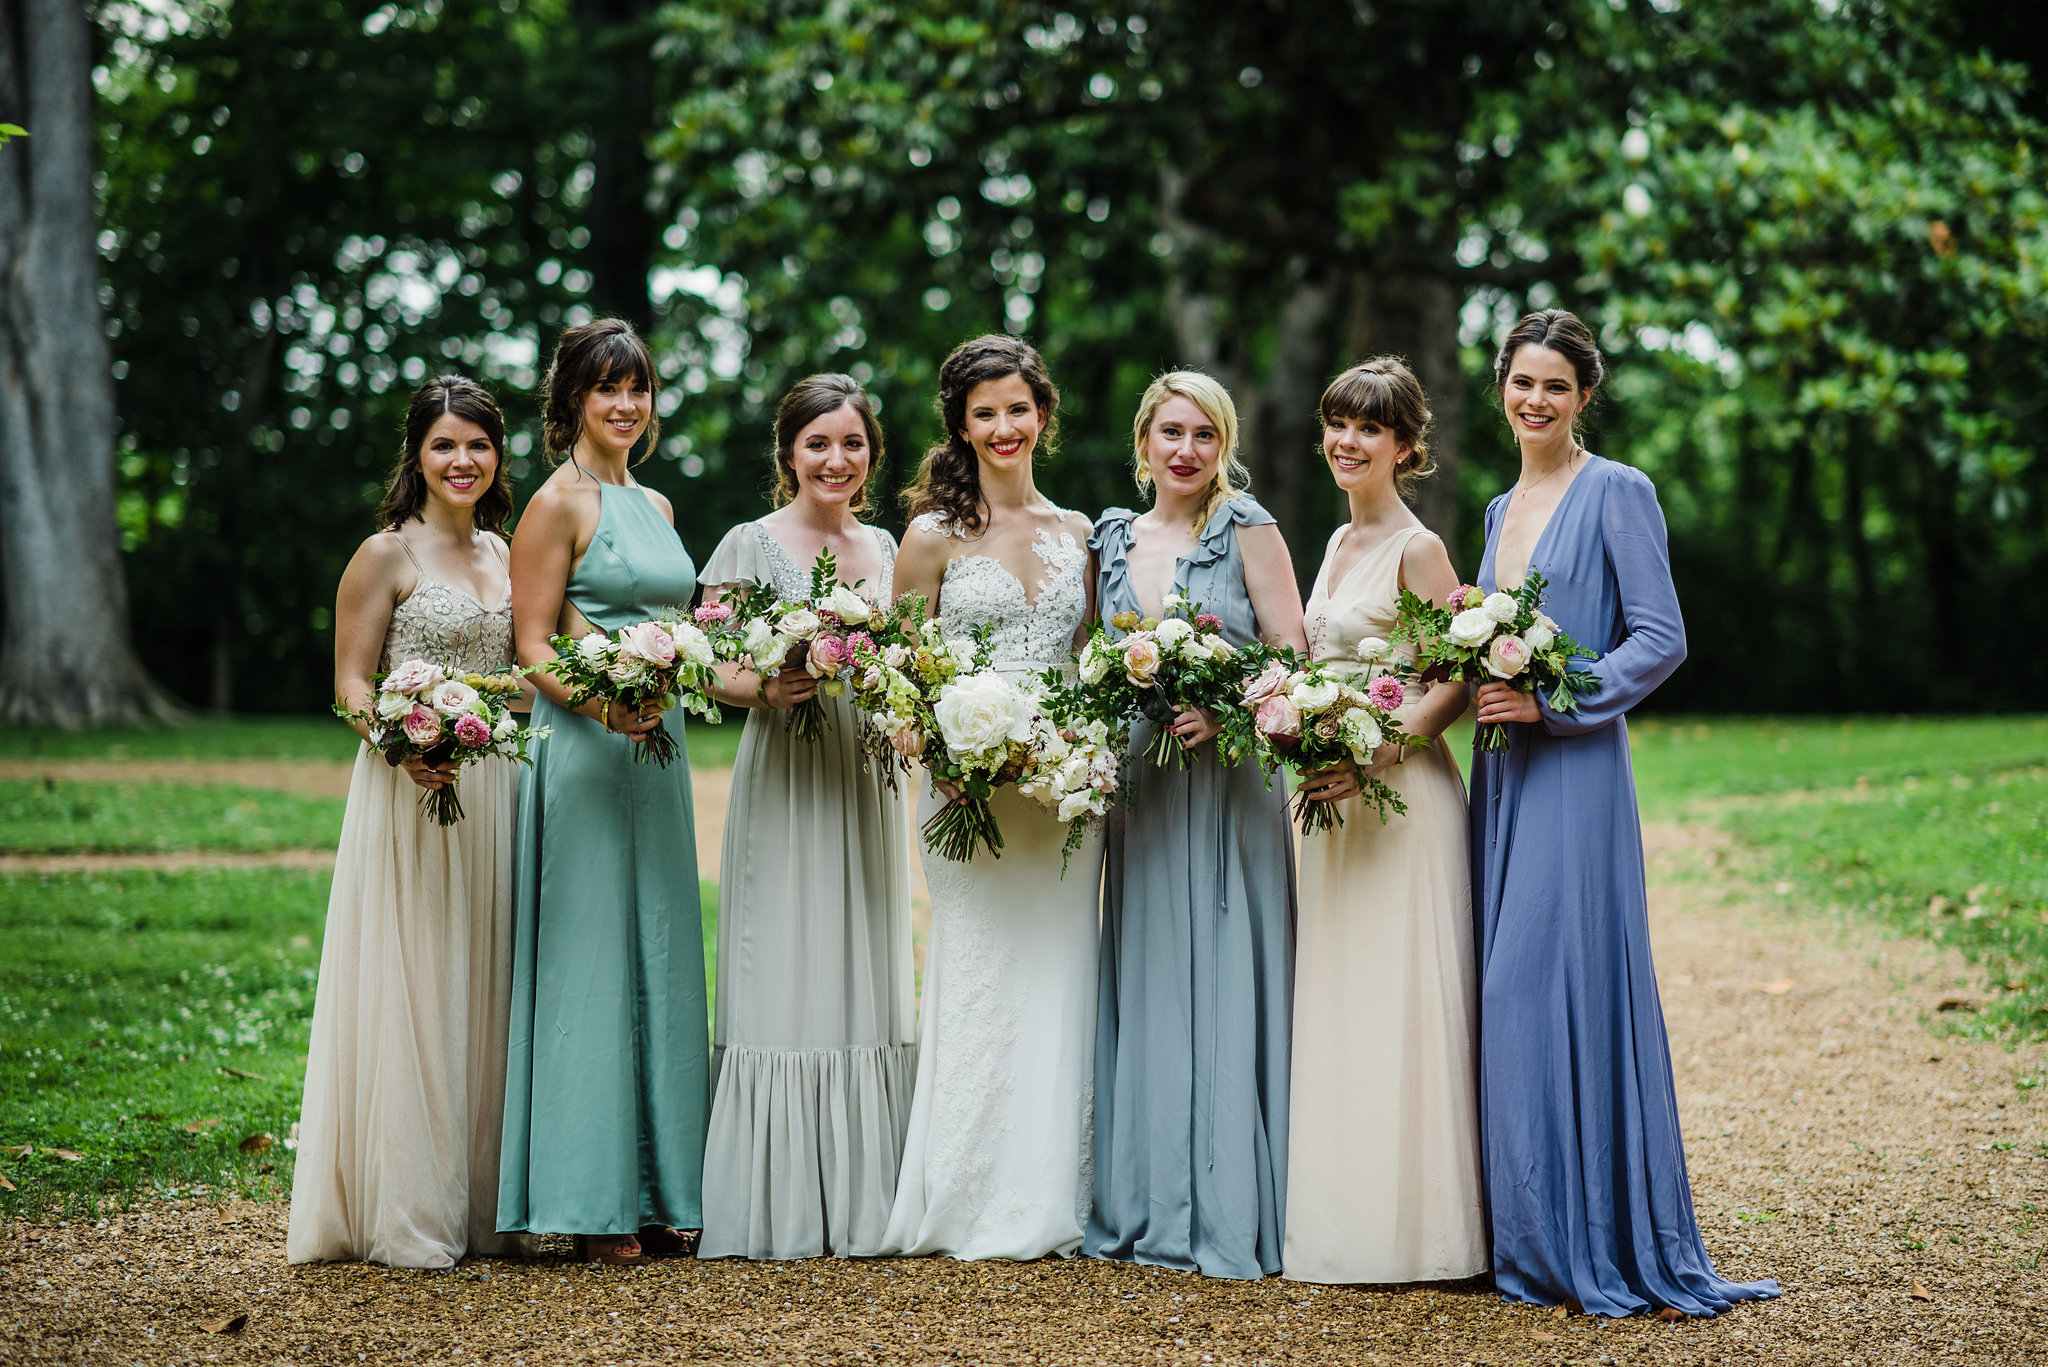 Soft blues and greens mix and match bridesmaid dresses // Garden party wedding with neutral, muted flowers with airy, whimsical greenery and texture // Southeastern Wedding Florist